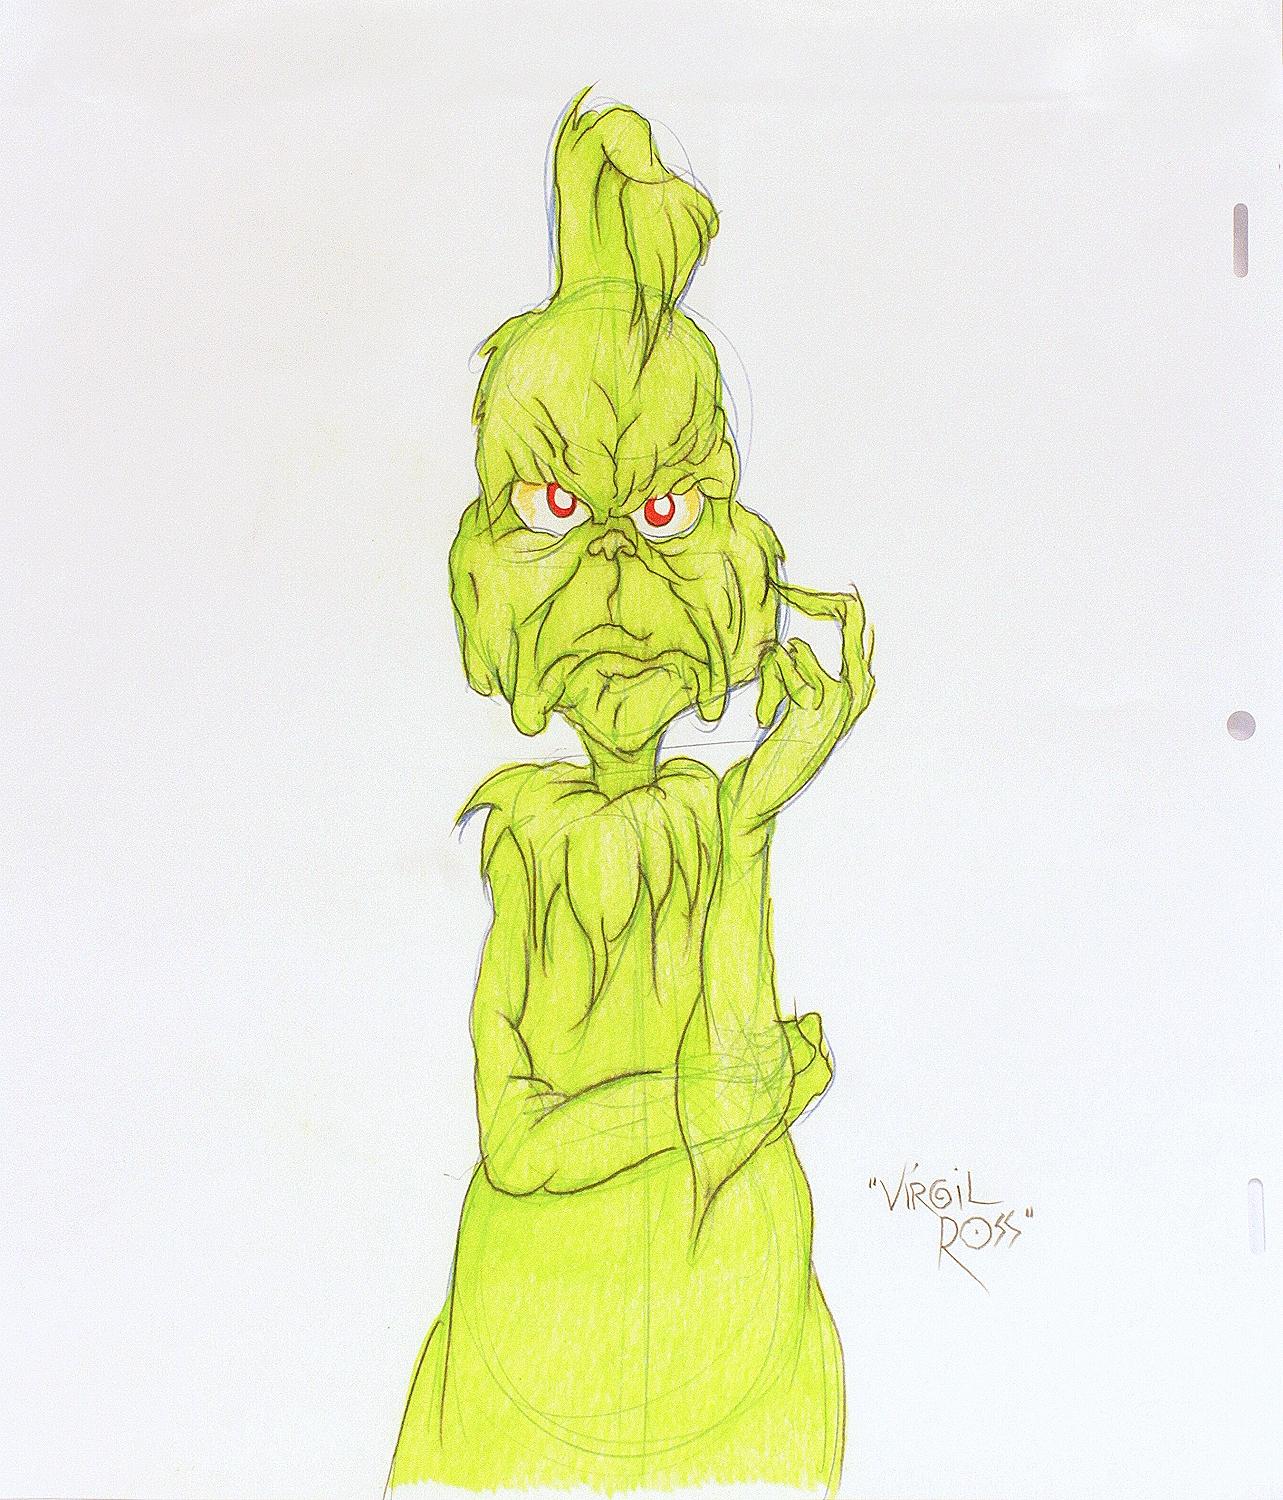 AUTHOR: GEISEL, Theodore: (Dr. Seuss) ( Virgil Ross ). 

TITLE: How The Grinch Stole Christmas. (Original drawing)

PUBLISHER: Warner Brothers Studios, (c.1990's)

DESCRIPTION: ORIGINAL DRAWING OF THE GRINCH. 3-1/2